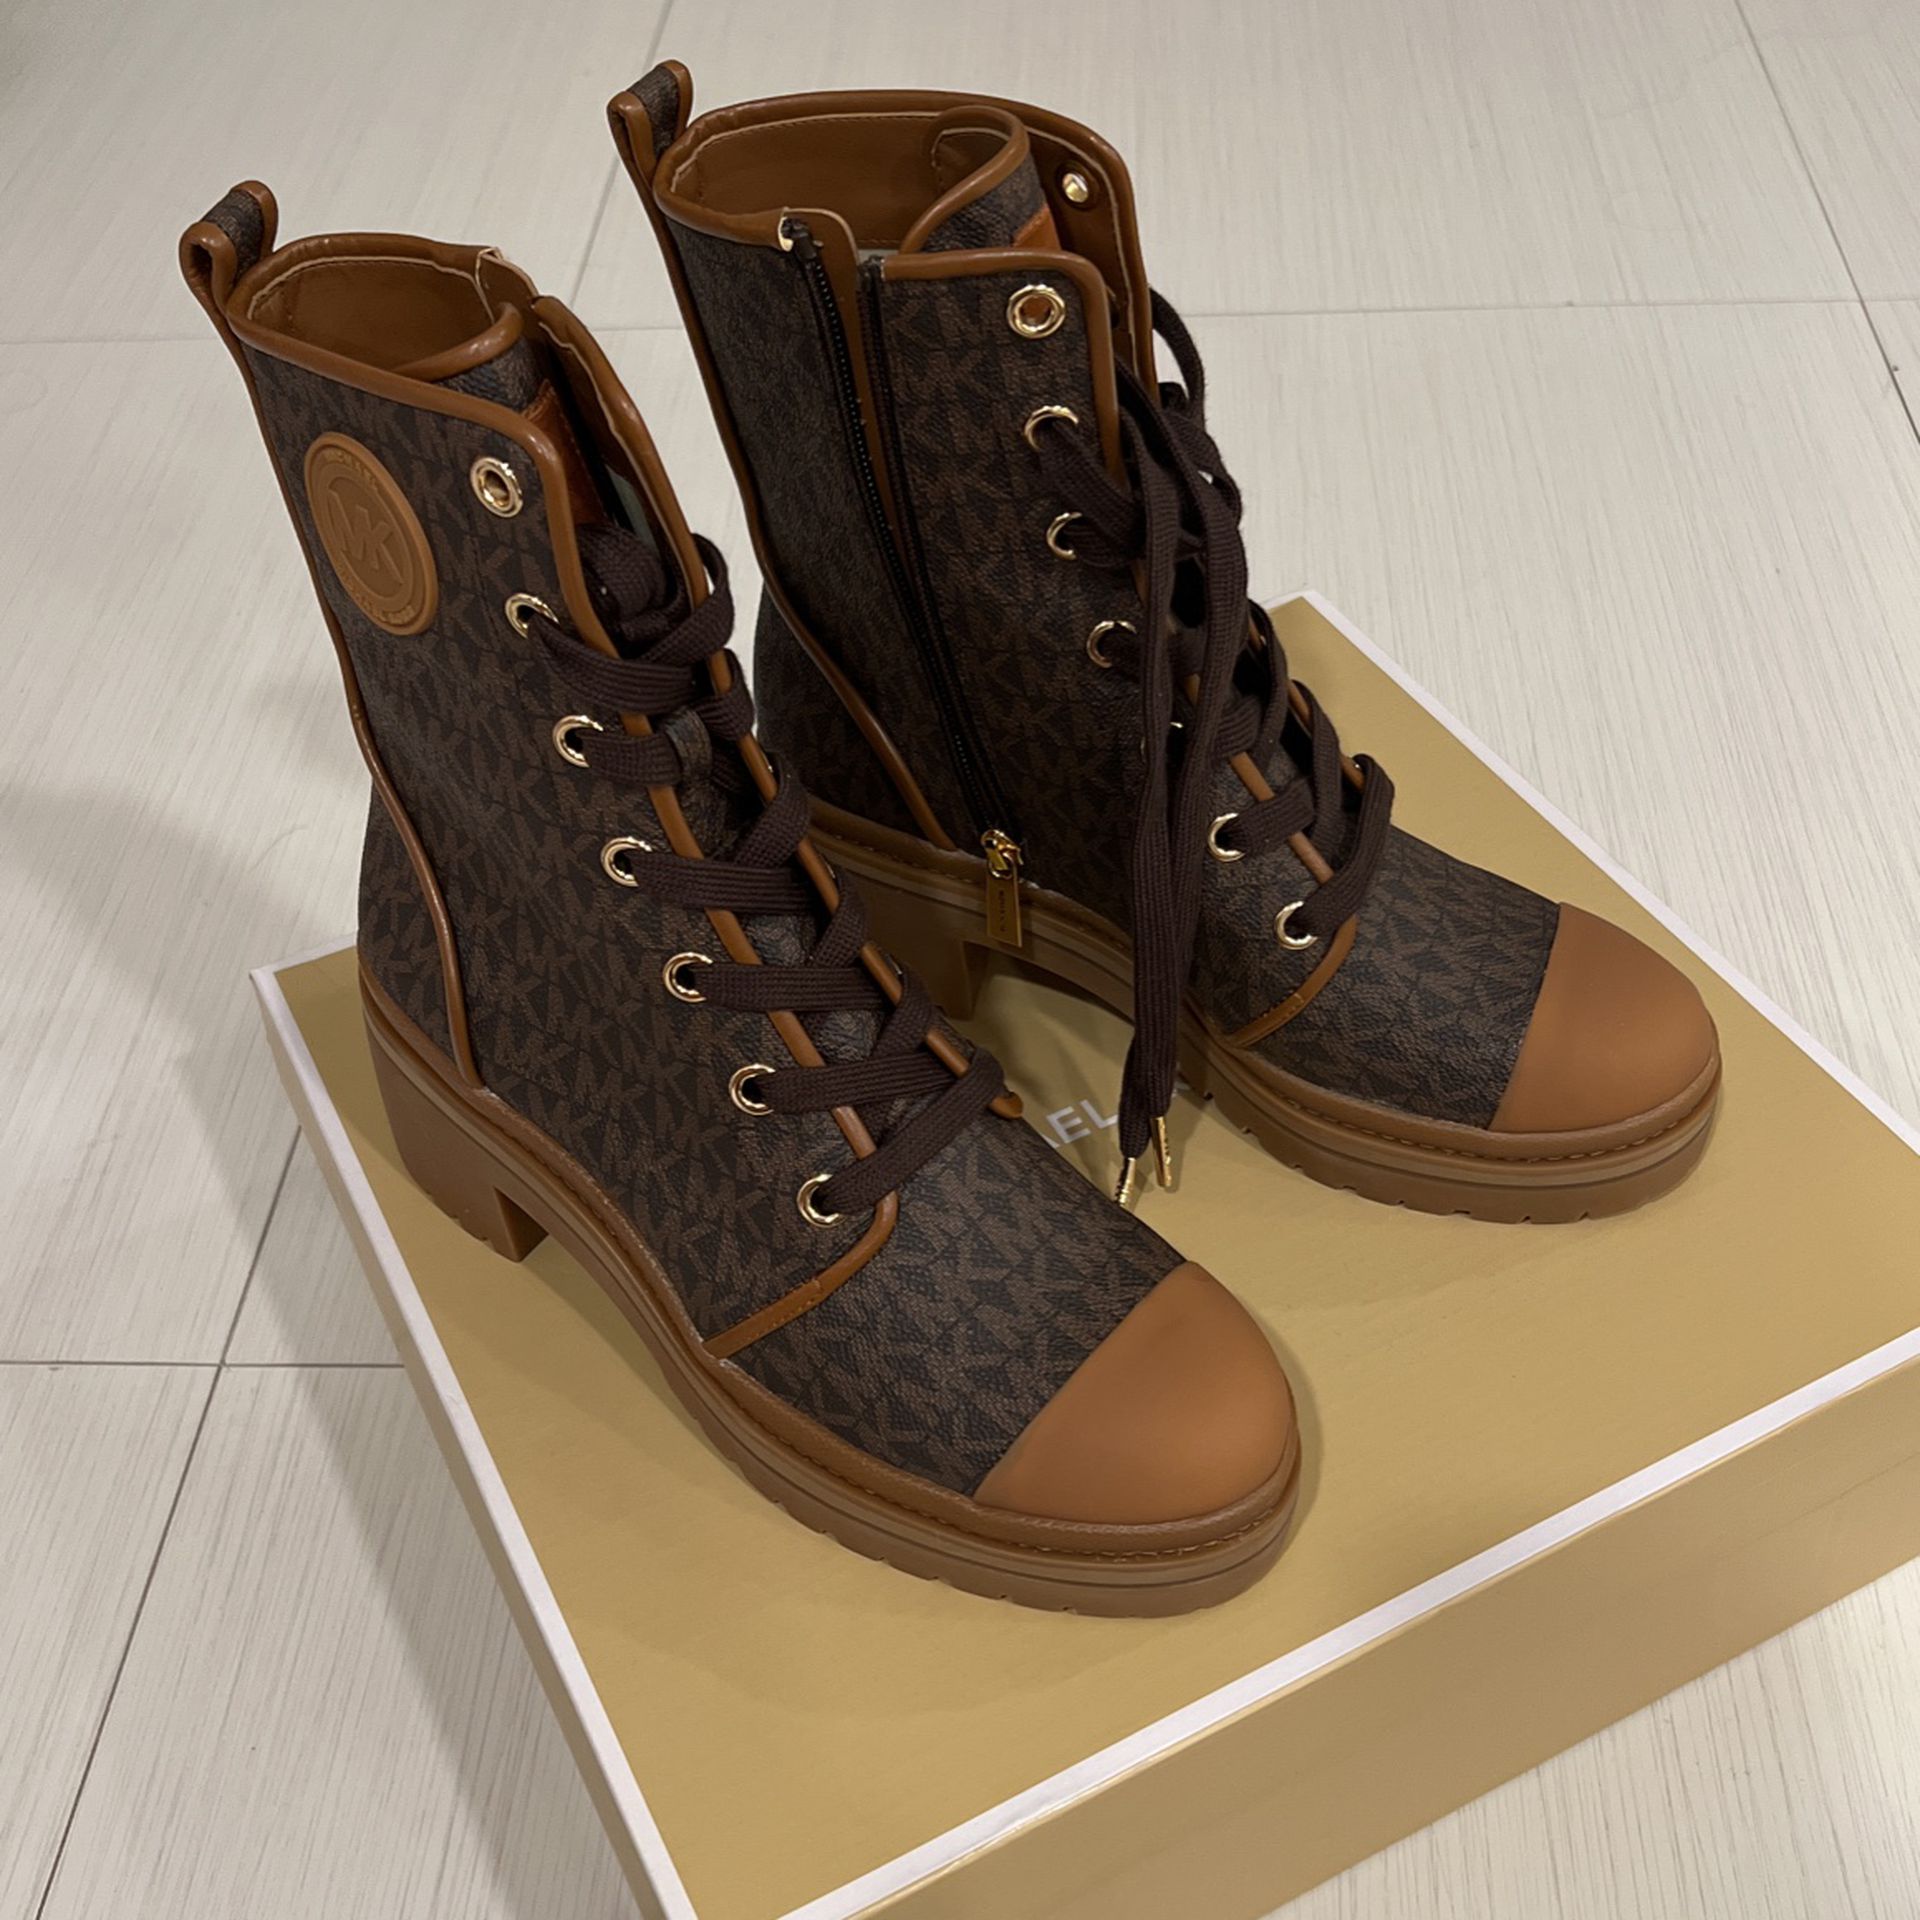 MICHAEL KORS BOOTS for Sale in Miami, FL - OfferUp